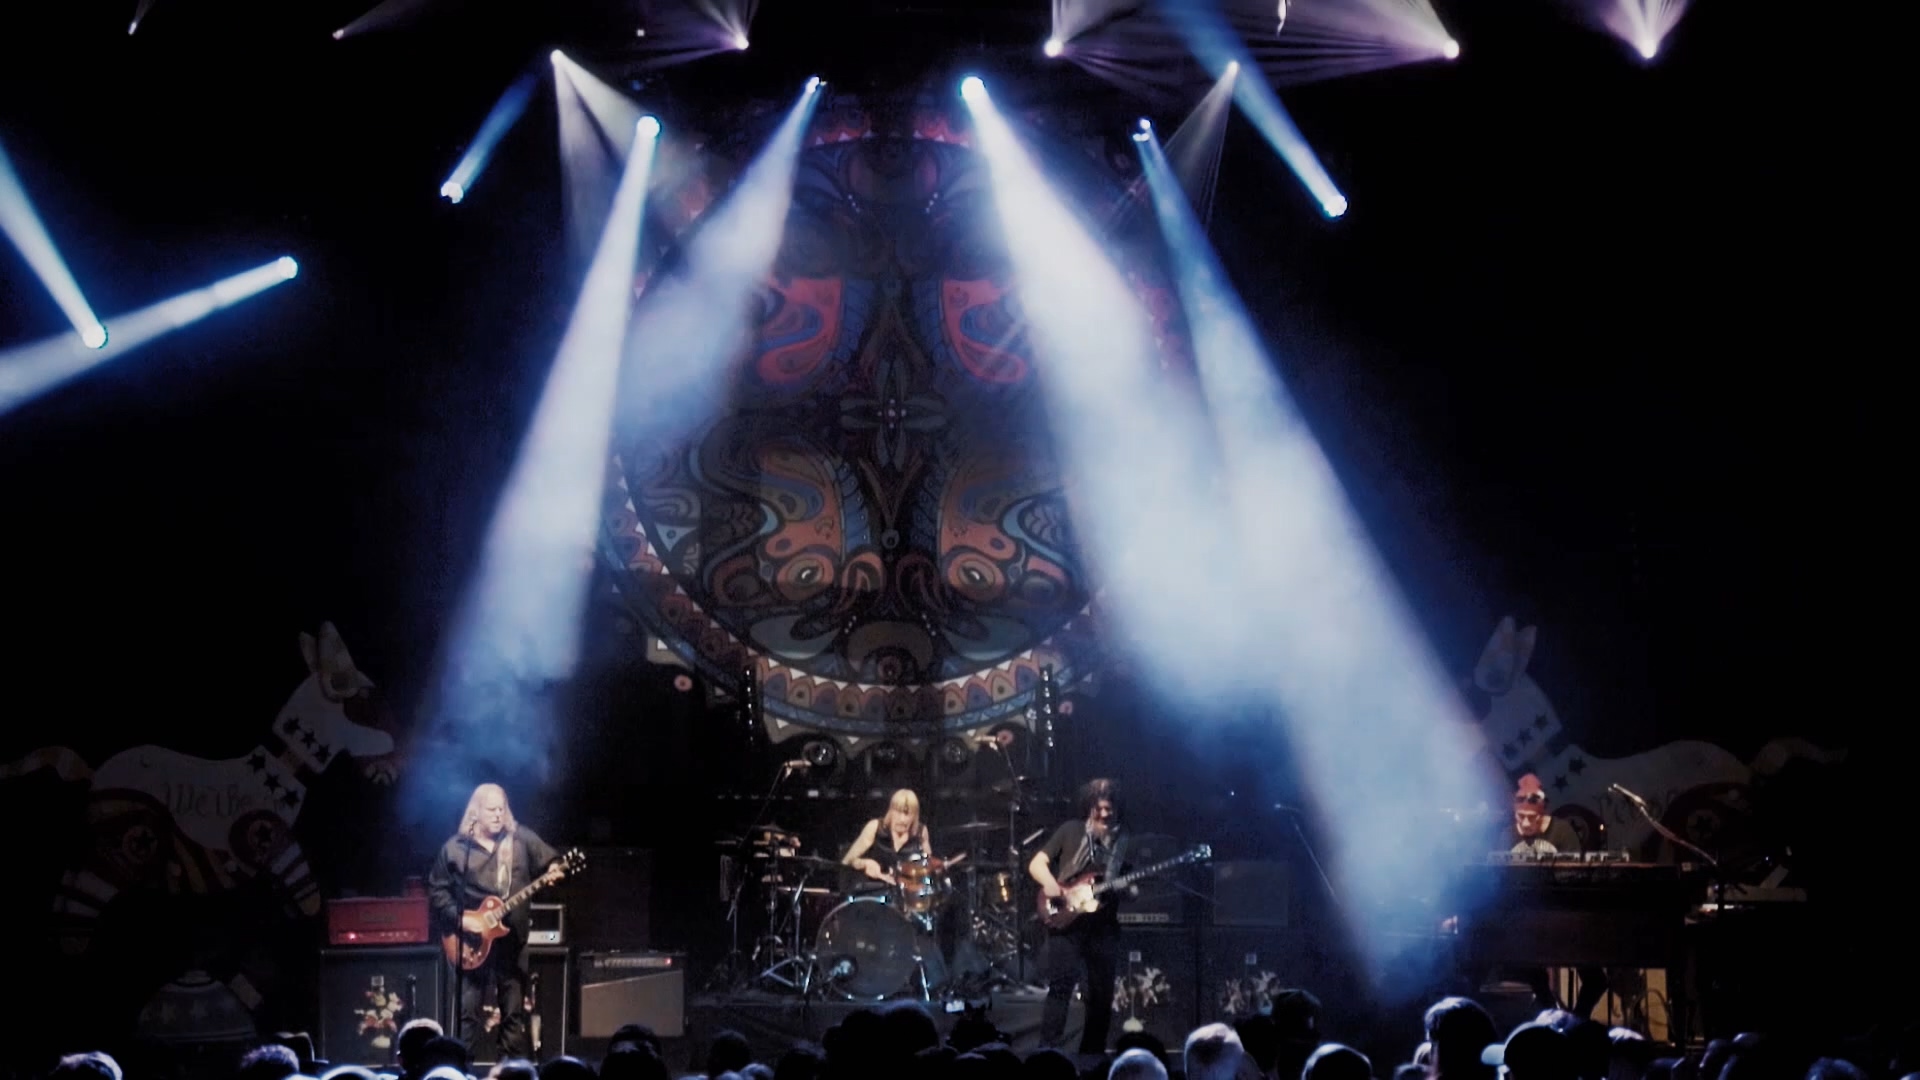 Gov't Mule - Bring On The Music Live At The Capitol Theatre 2018 Bluray 1080p AVC DTS-HD MA 5.1_20190727_125546.346.jpg